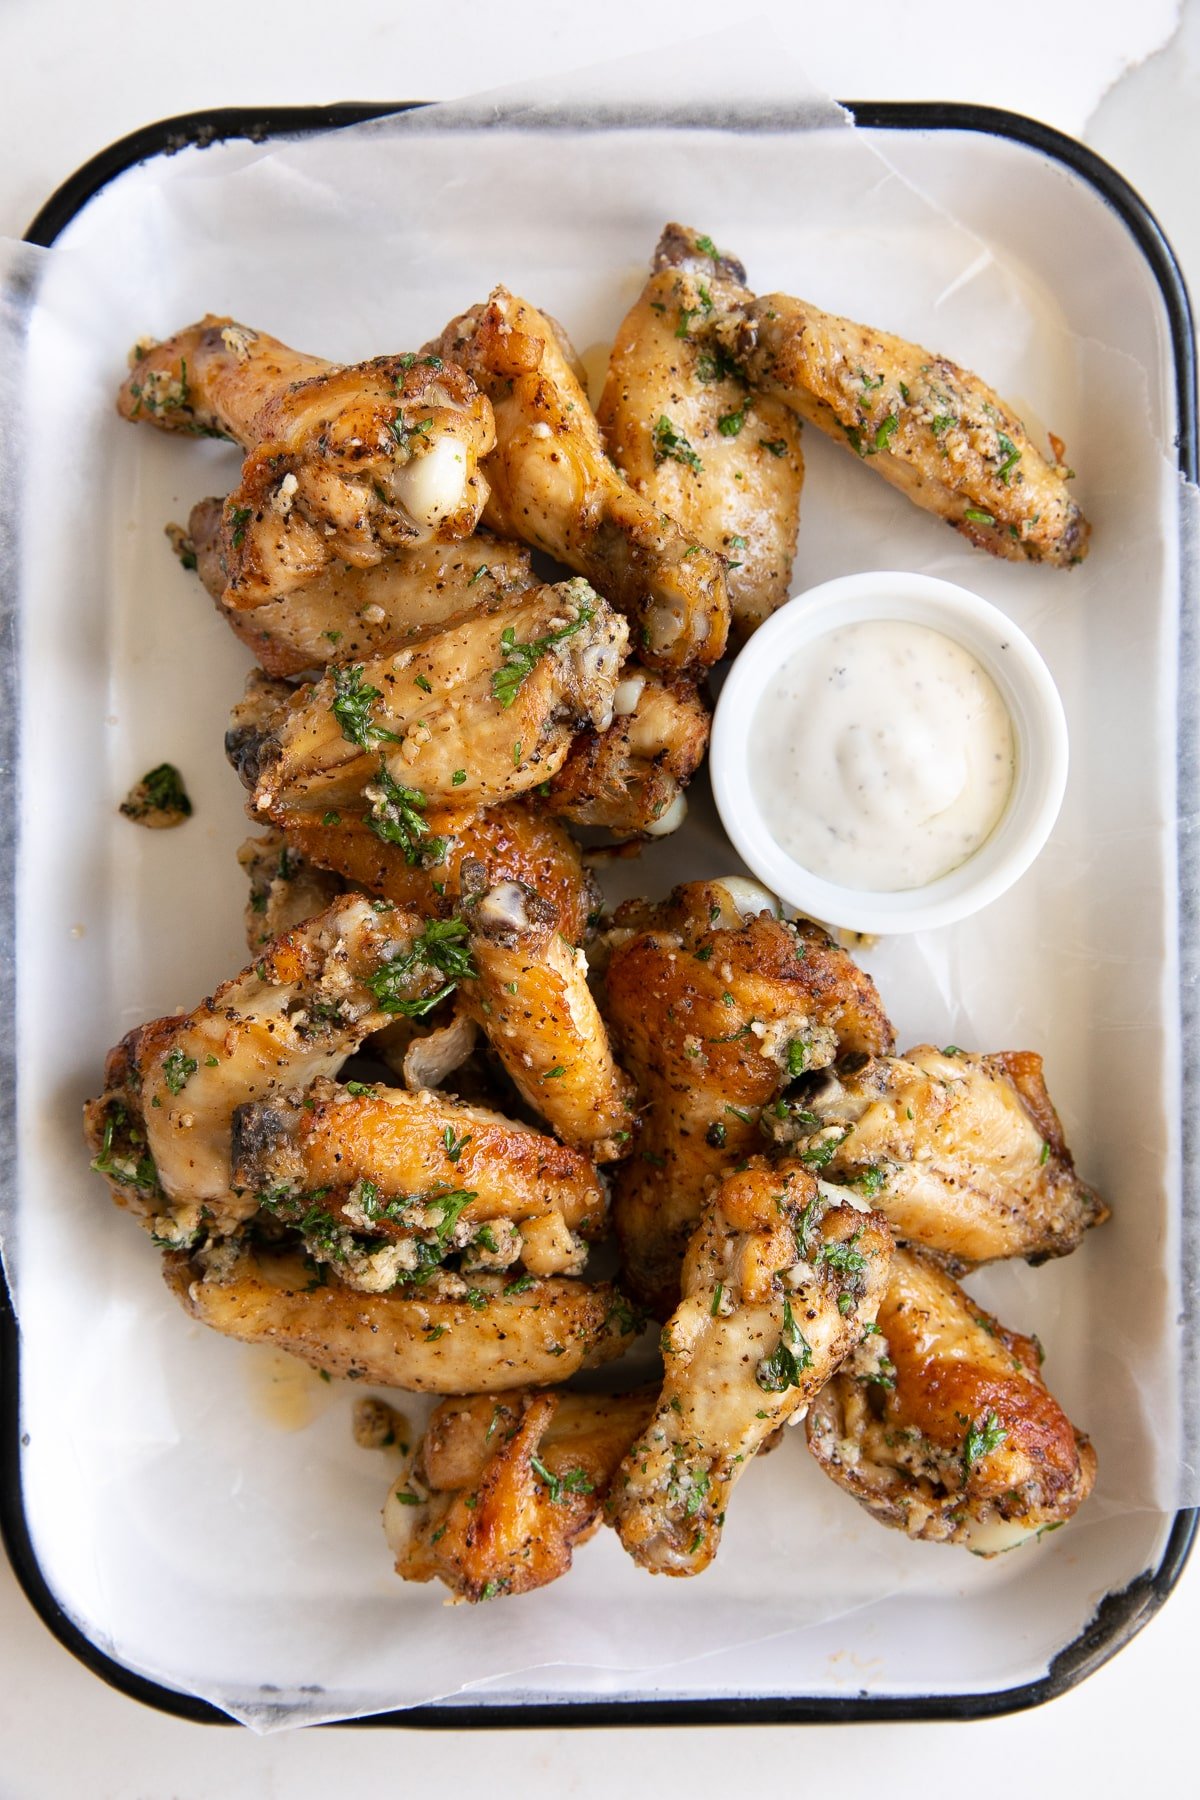 Serving tray topped with crispy baked garlic parmesan wings and served with a side of ranch dressing.